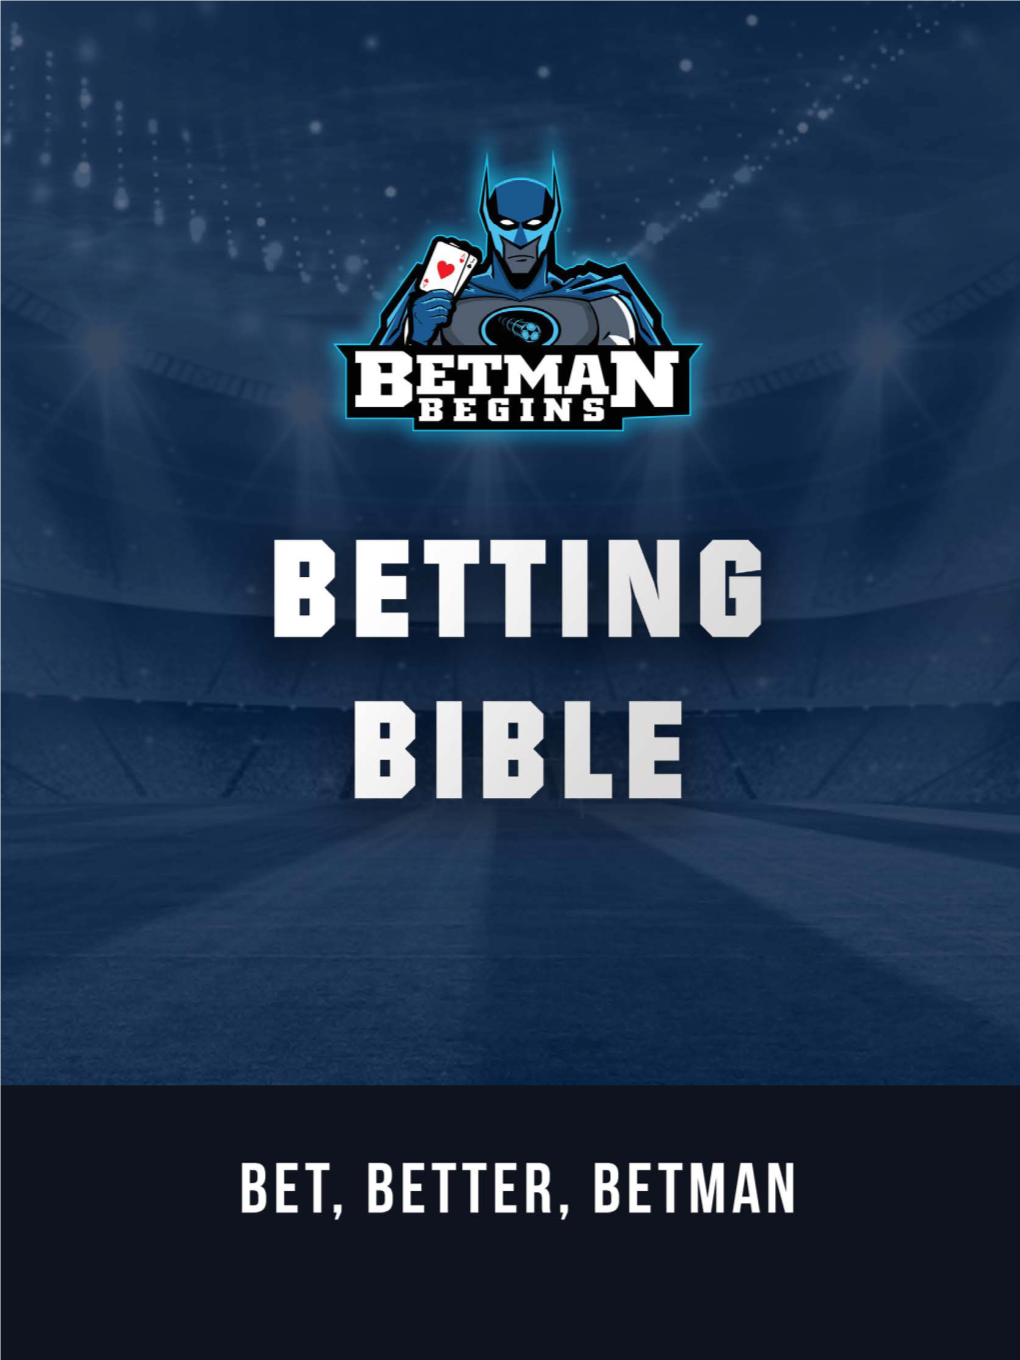 Download the Betting Bible Here